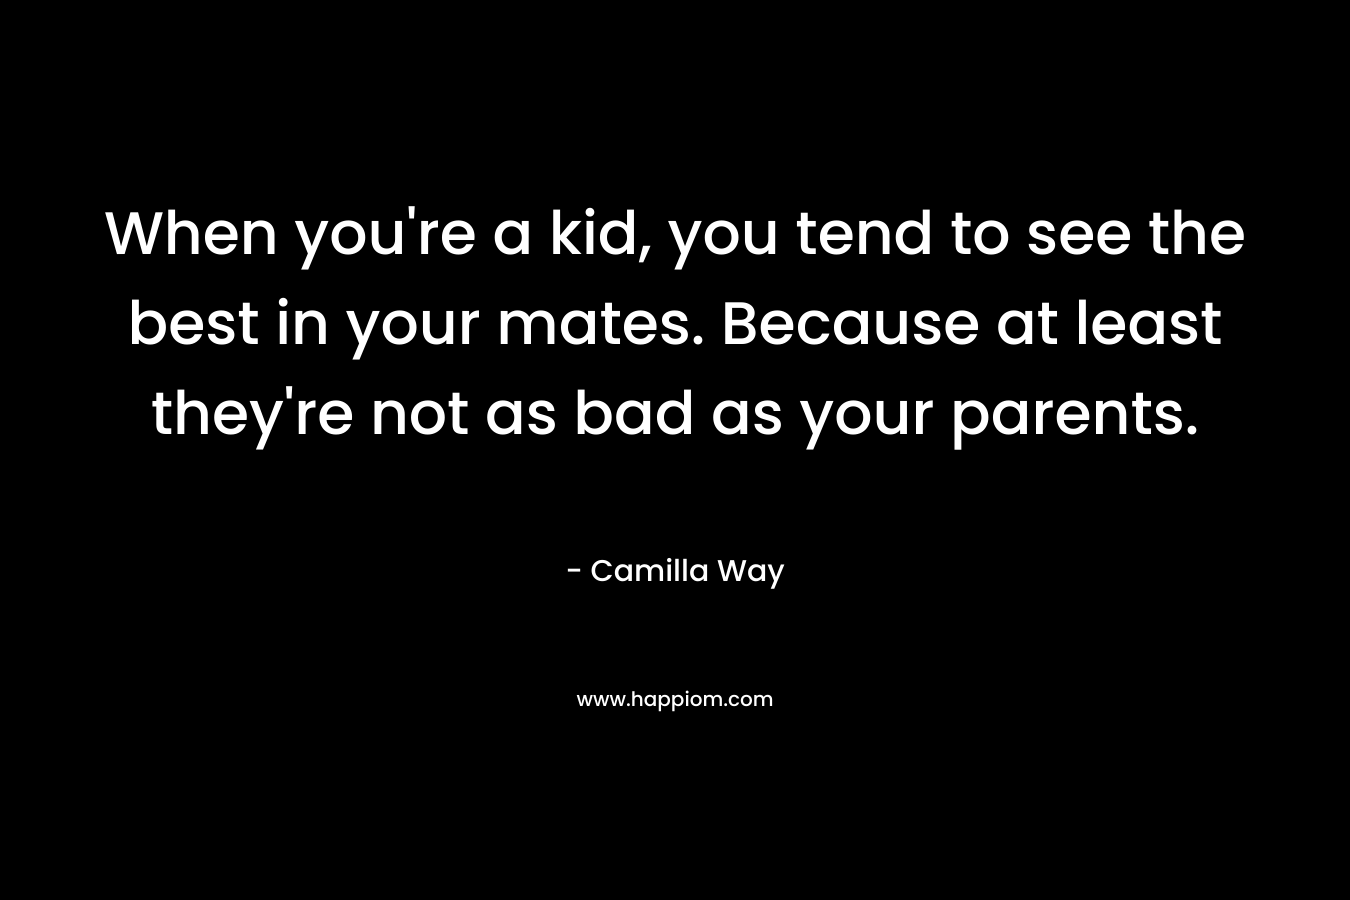 When you’re a kid, you tend to see the best in your mates. Because at least they’re not as bad as your parents. – Camilla Way